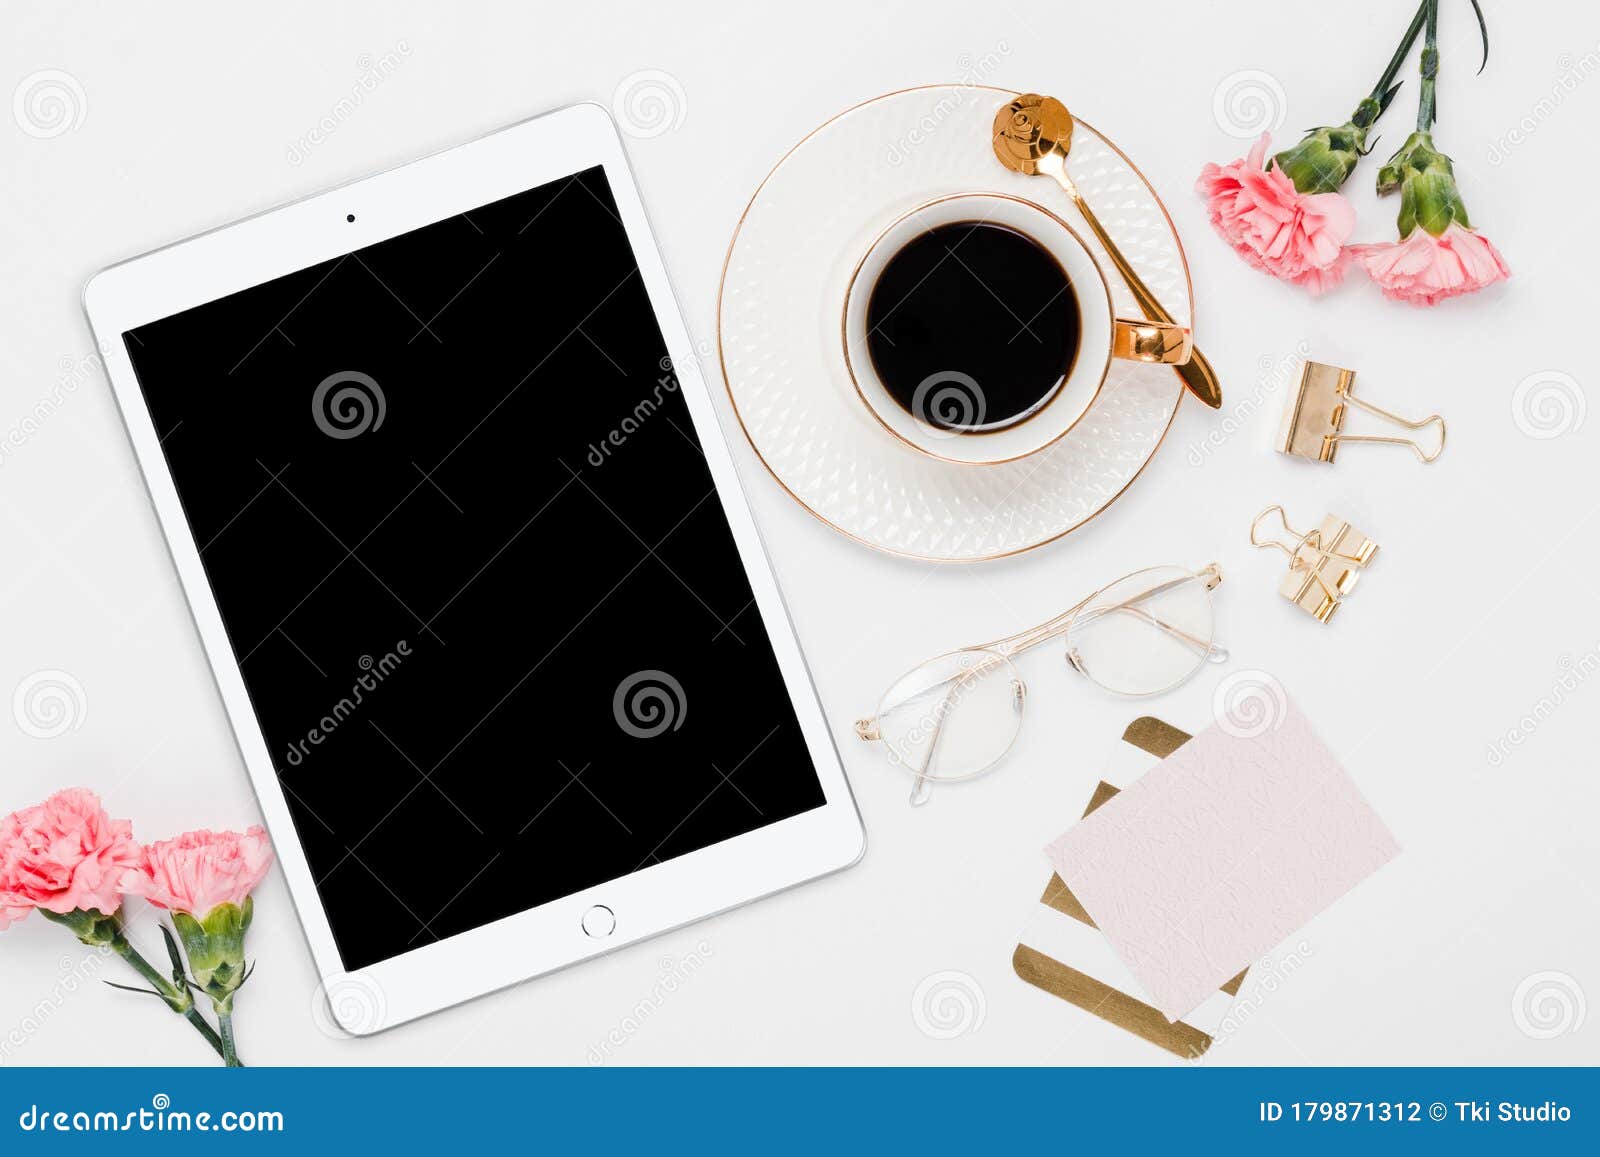 ipad with gold desk accessories and pink flowers in a white background